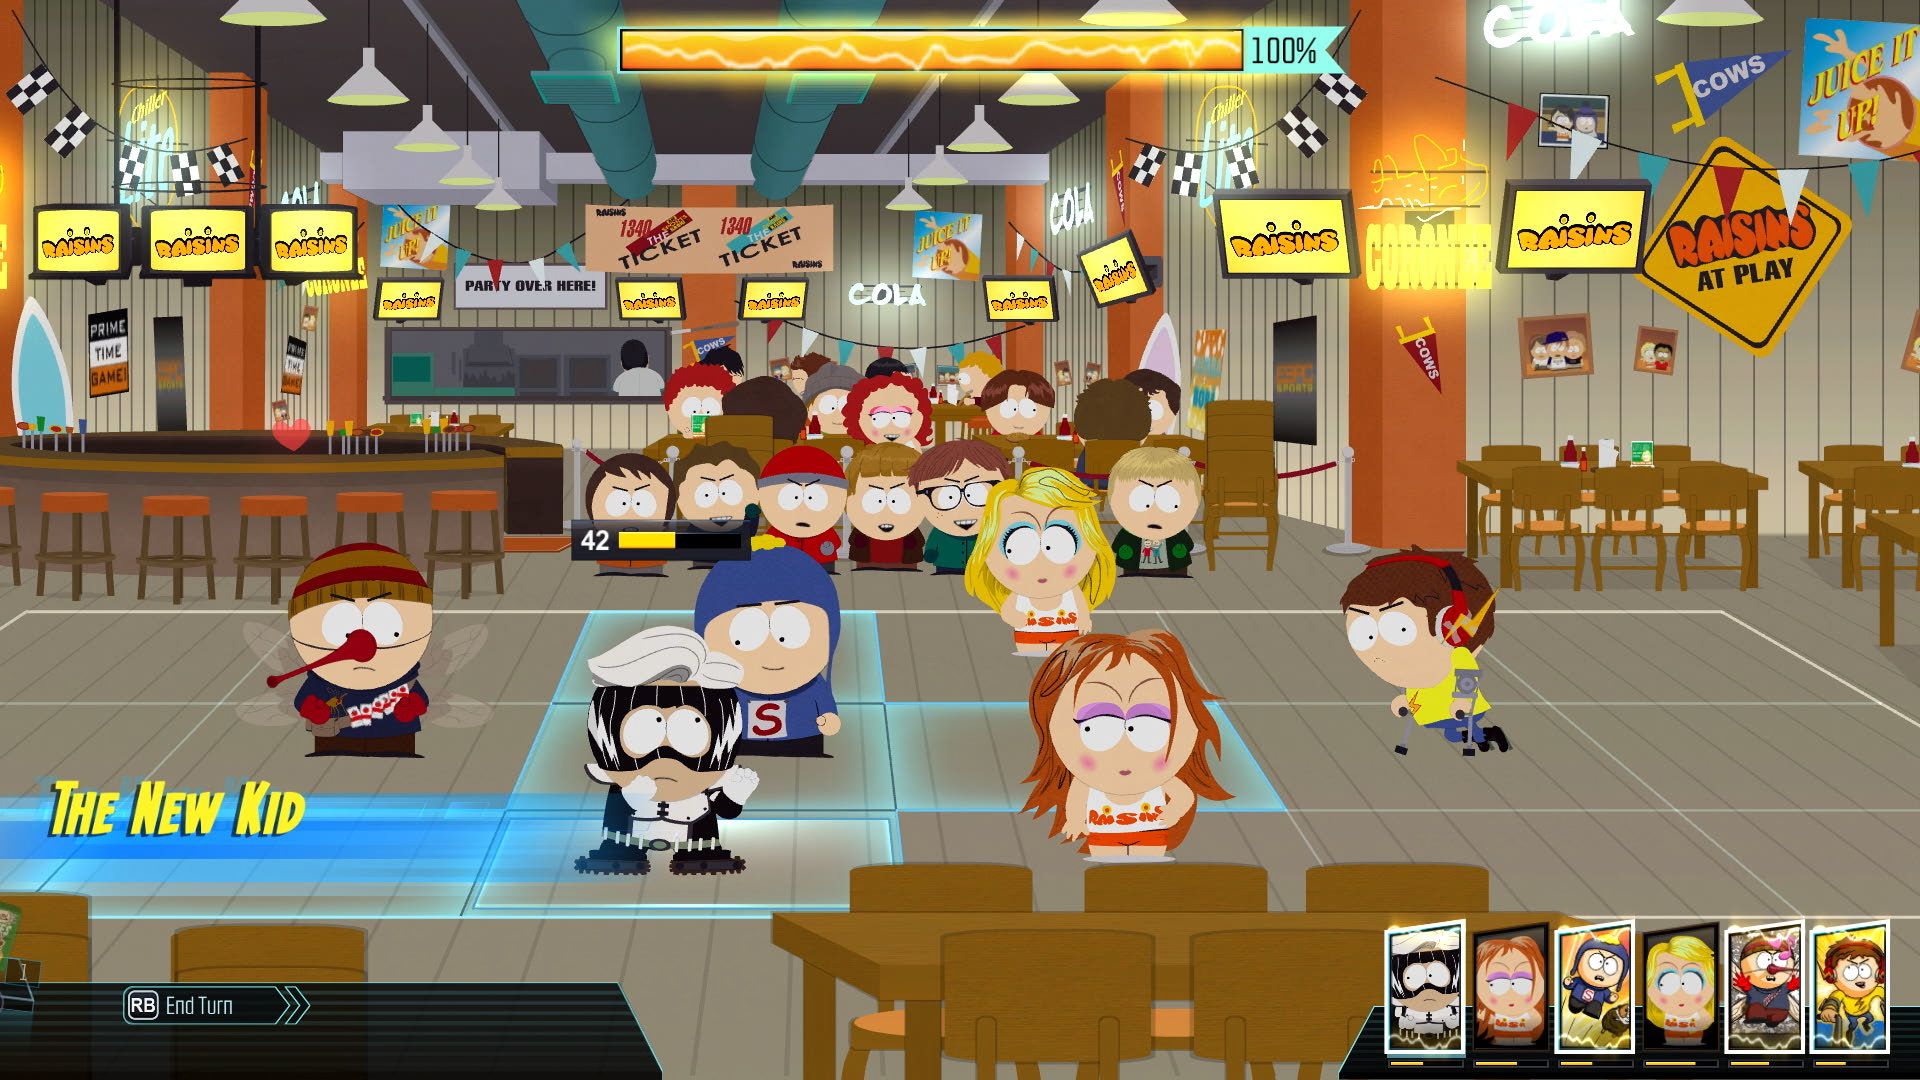 South Park The Fractured But Whole screens image 3